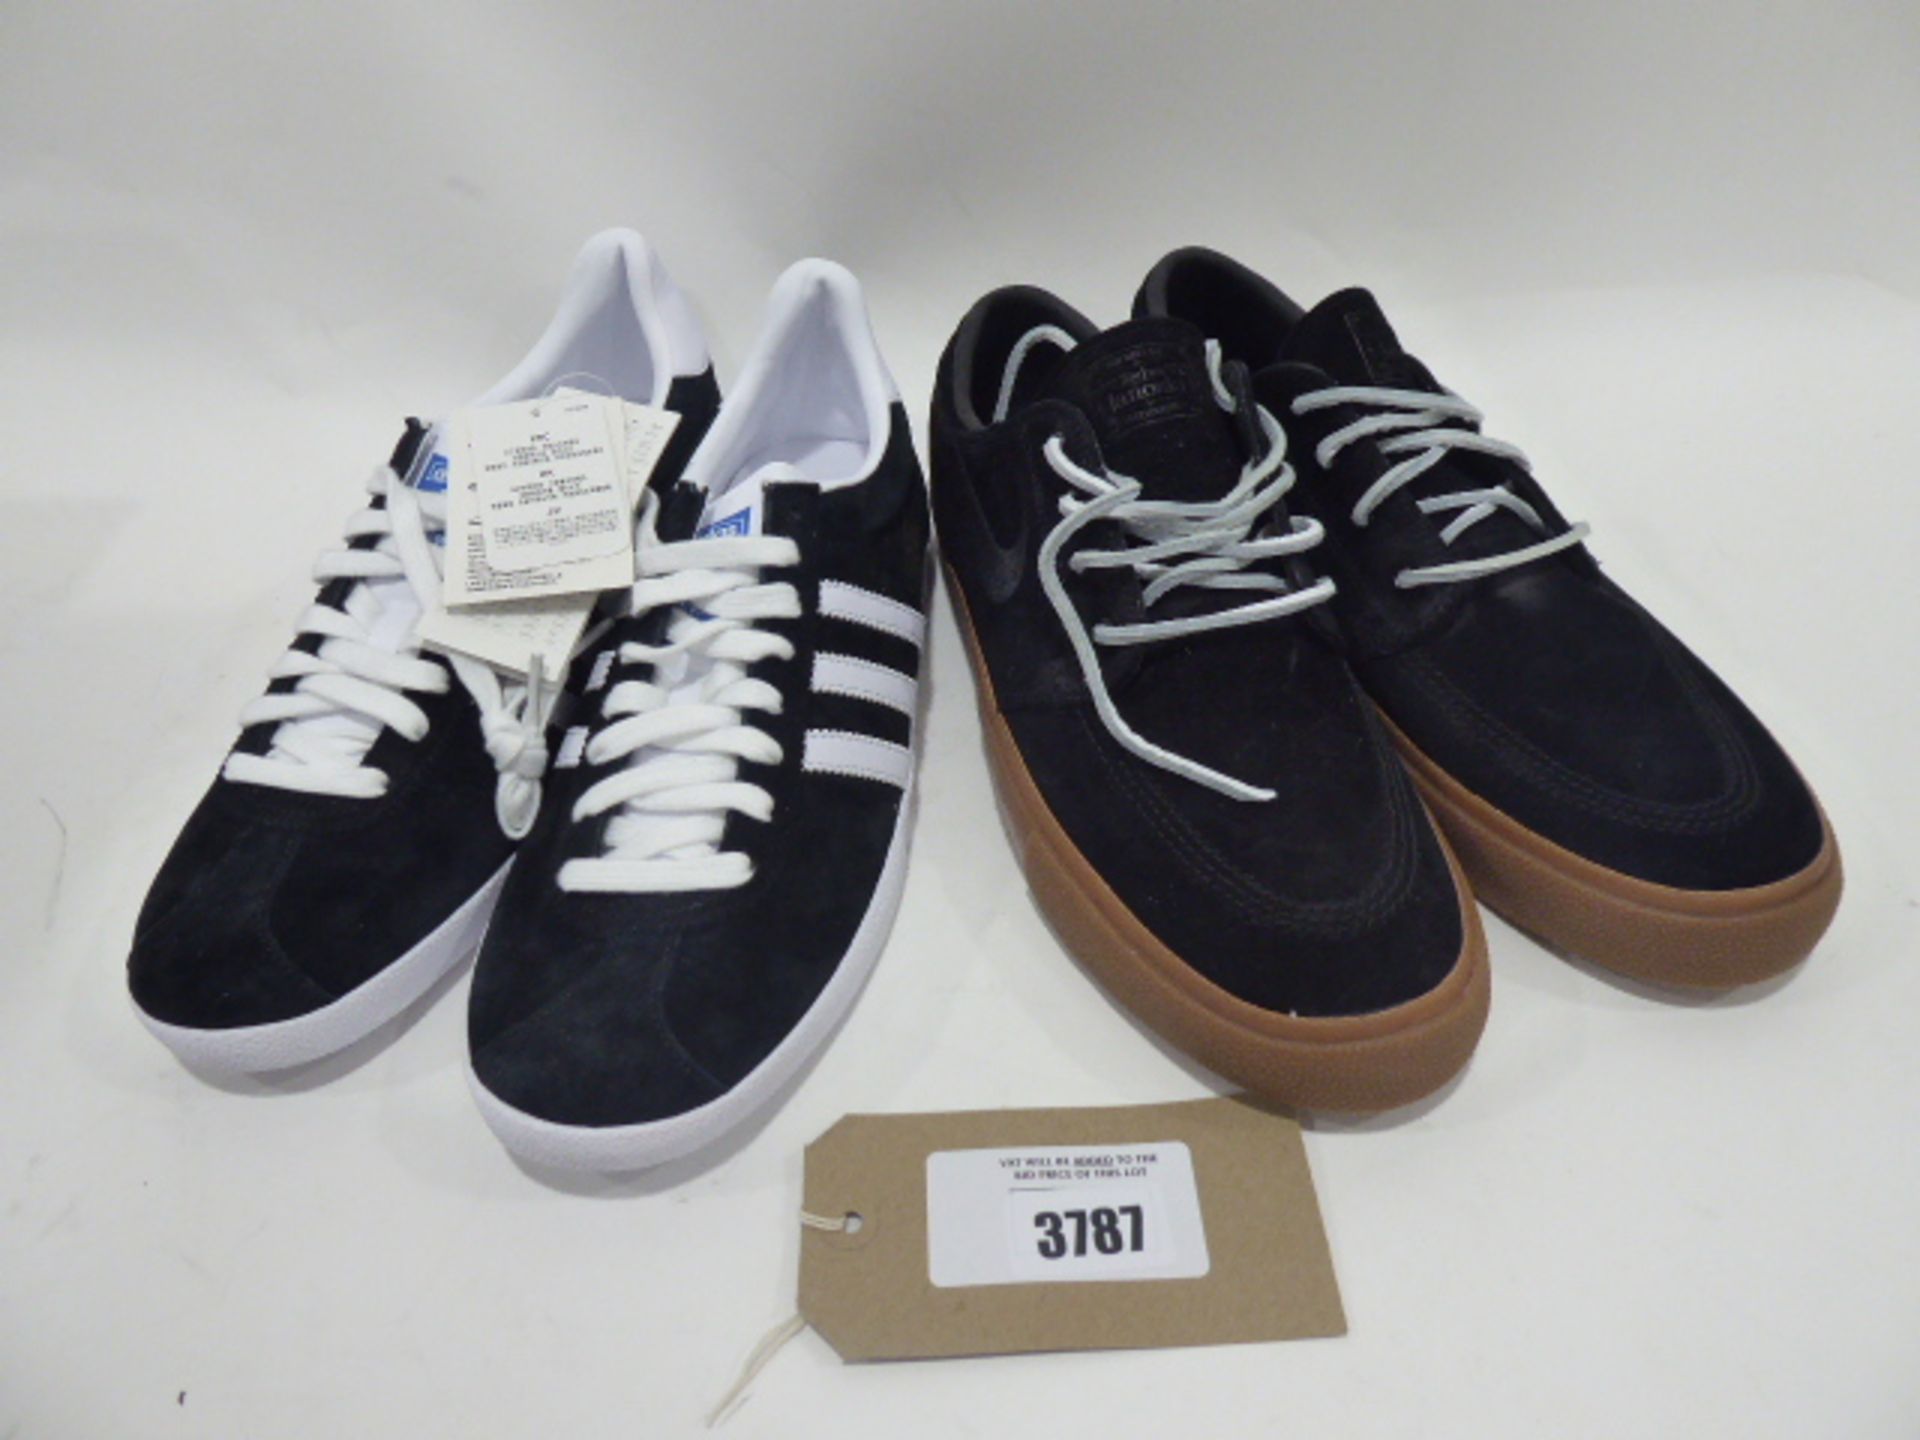 Adidas Gazelle trainers in black UK 11 and Nike SB trainers in black UK 10.5